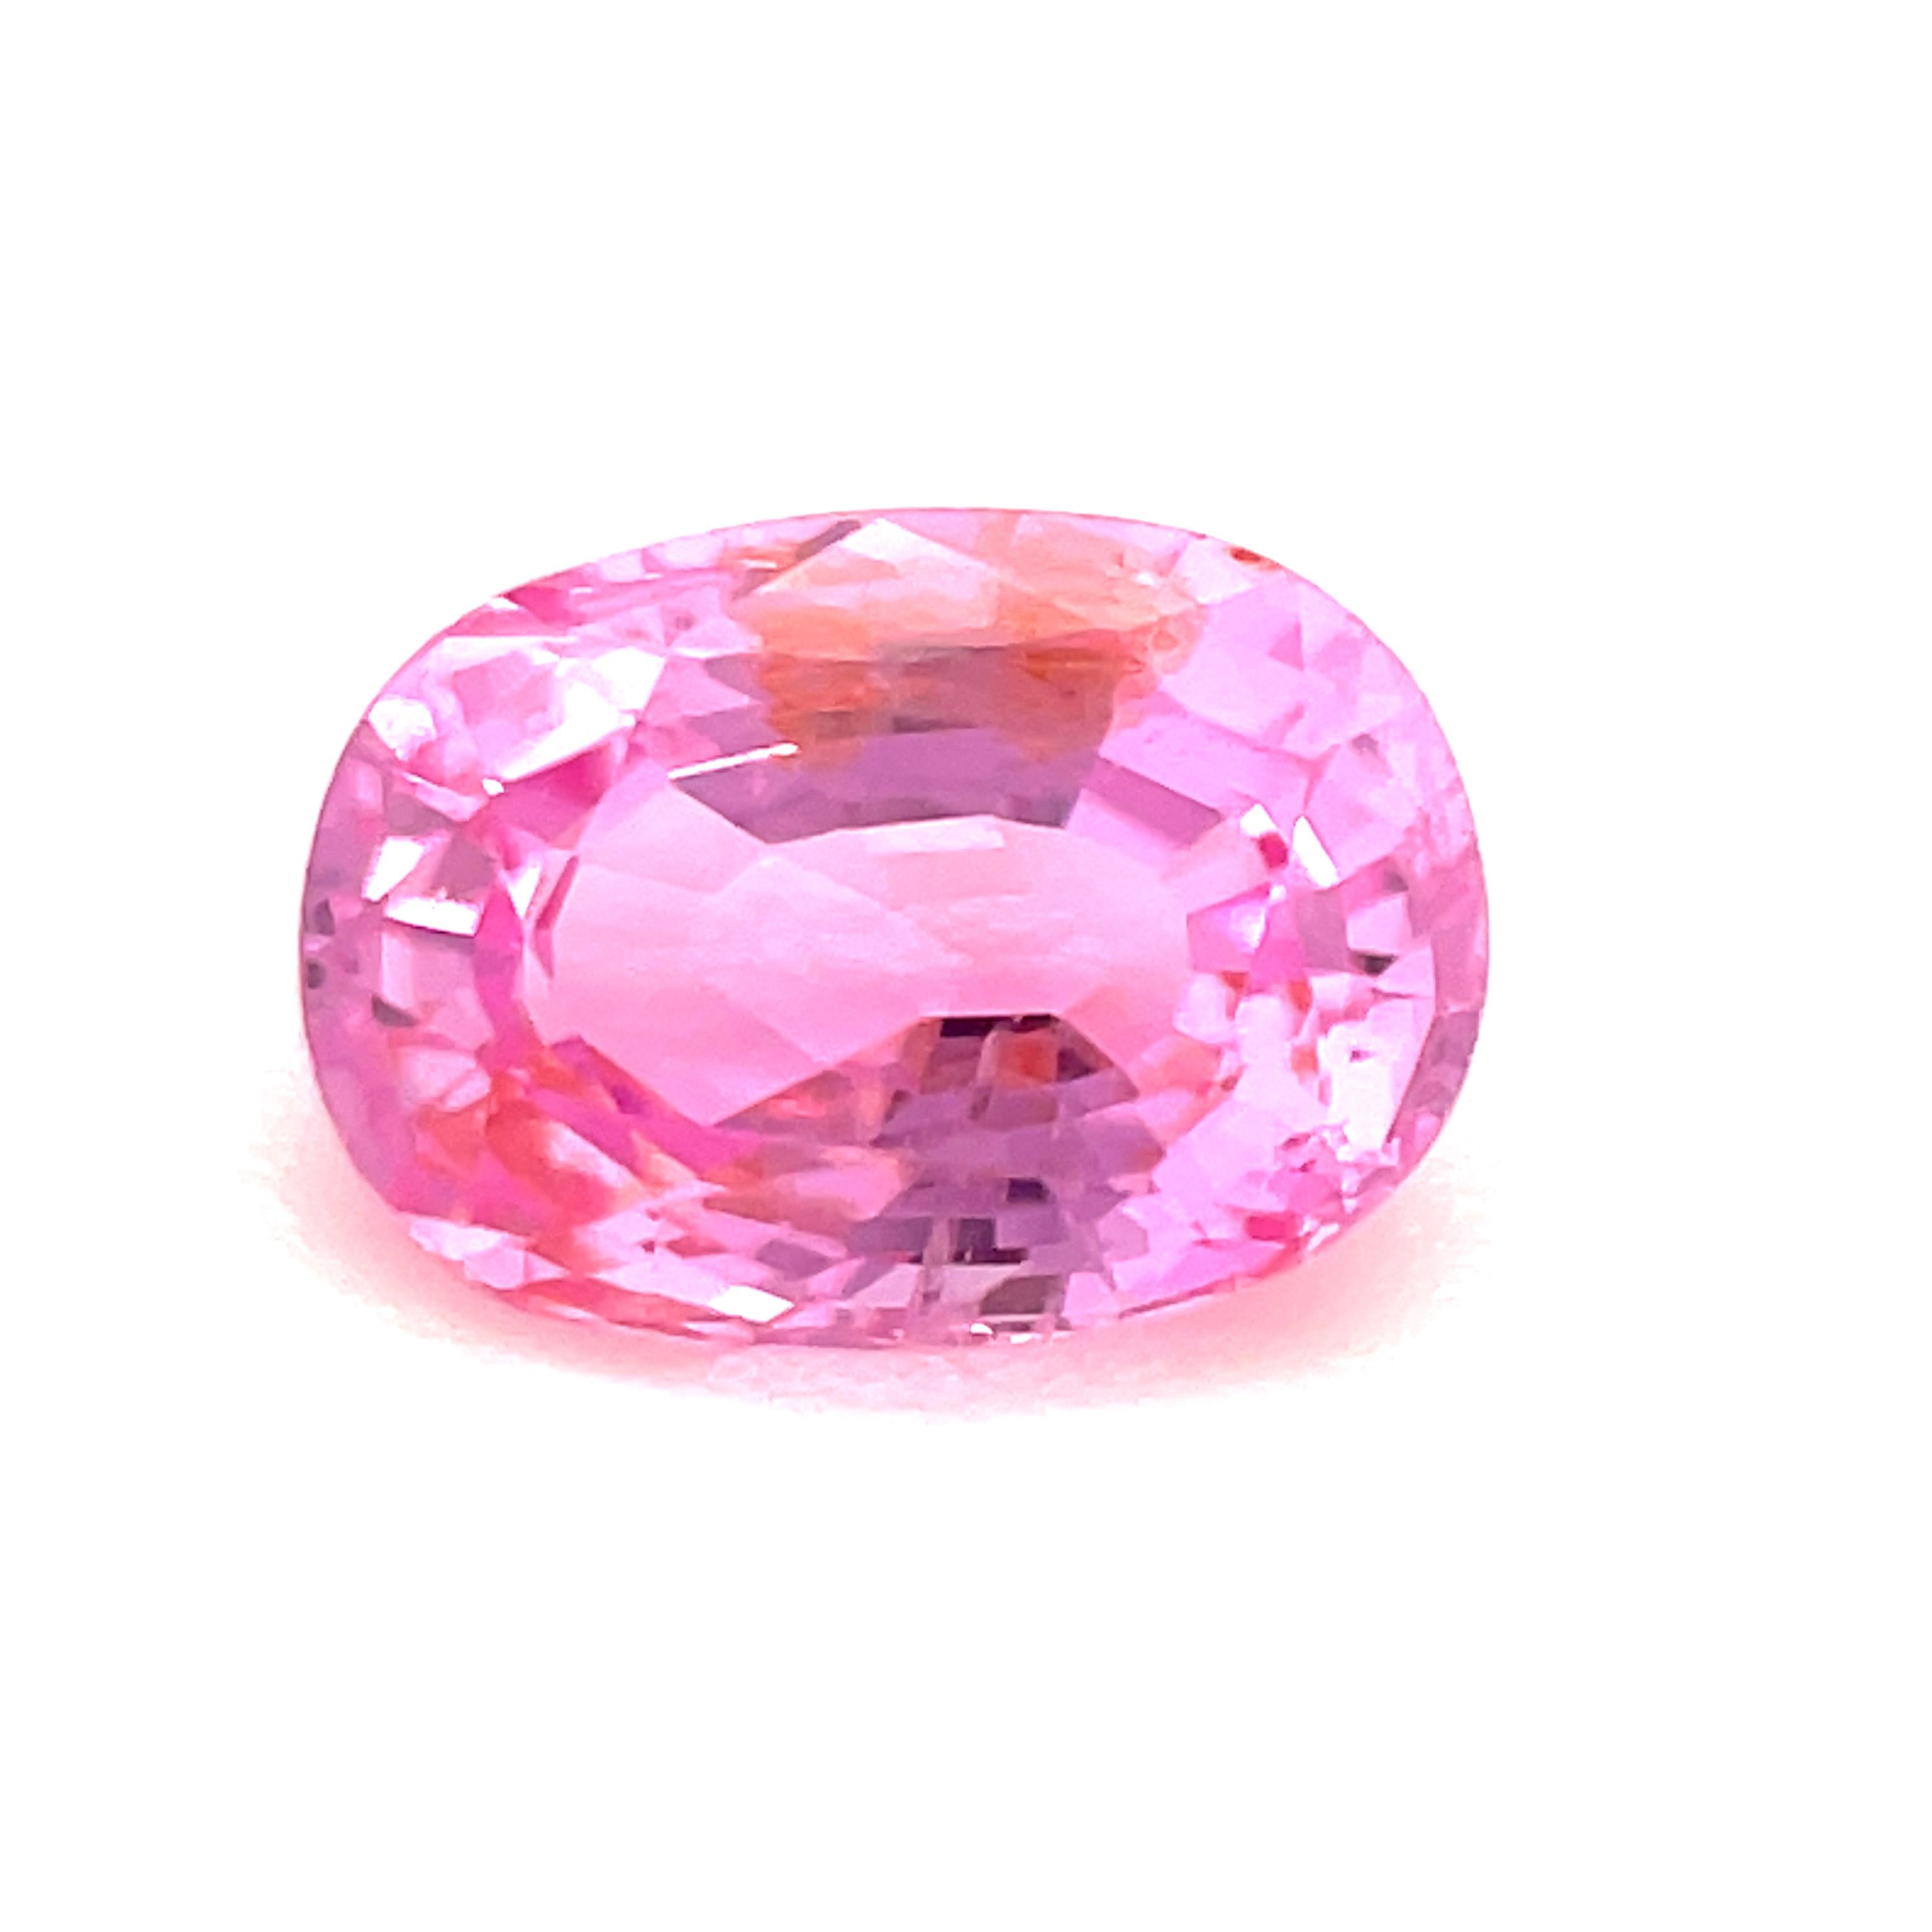 This sparkling bubblegum pink sapphire has rich color that will make a stunning ring or pendant! Measuring 6.93 x 4.94 millimeters, it has both beautifully bright pink color and an elegant shape. This gem is eye clean with wonderful life and salmon